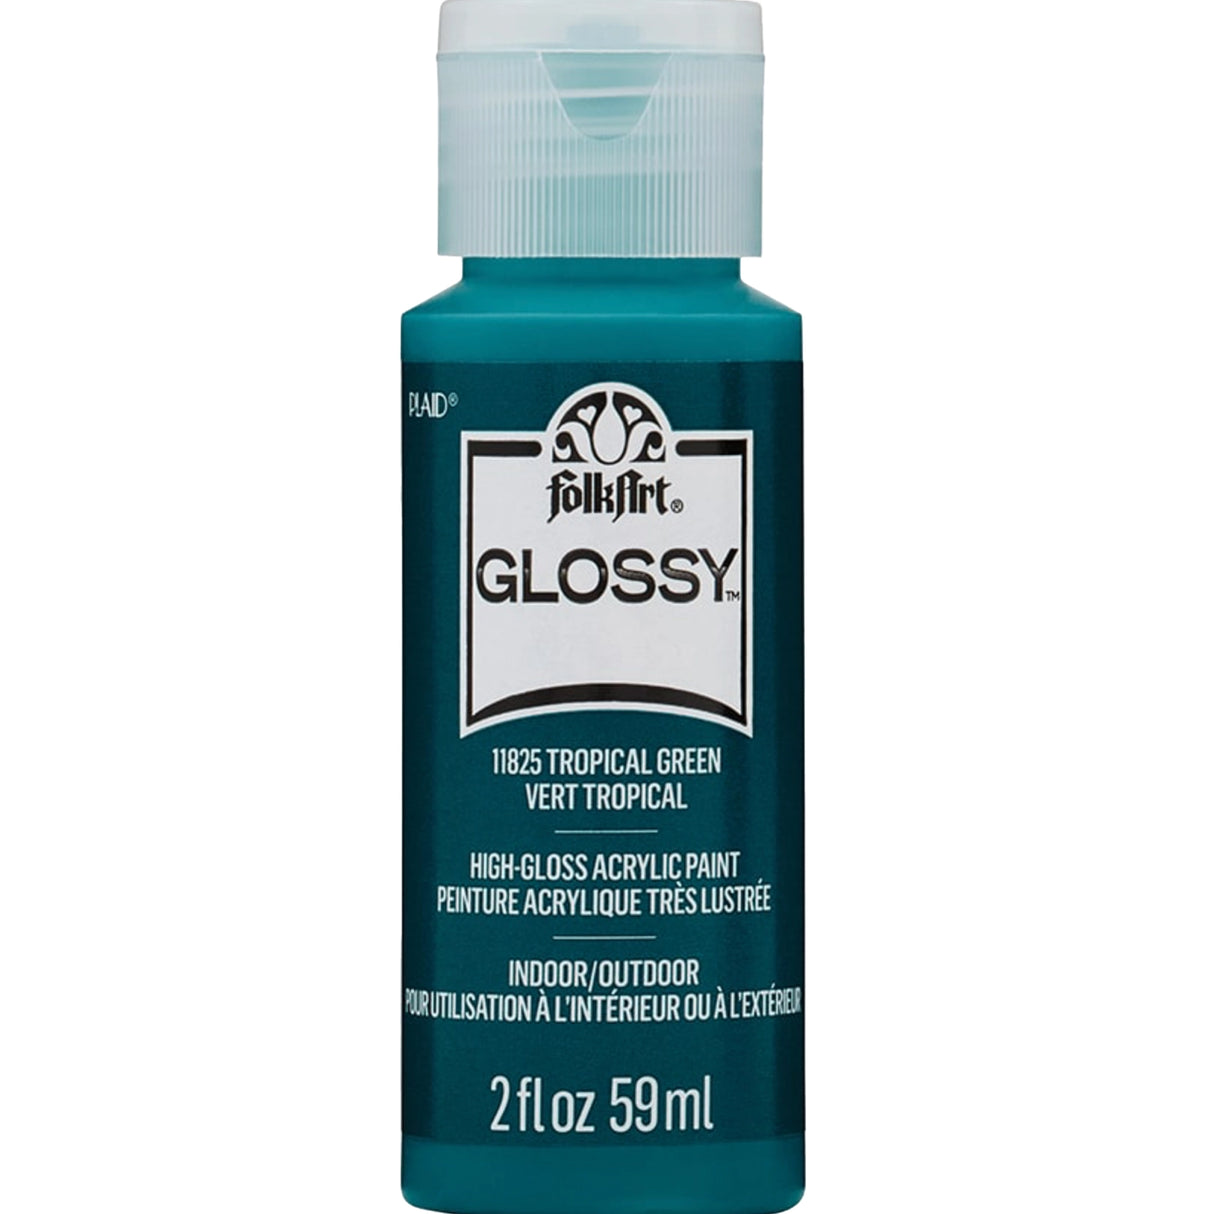 glossy acrylic paint tropical green